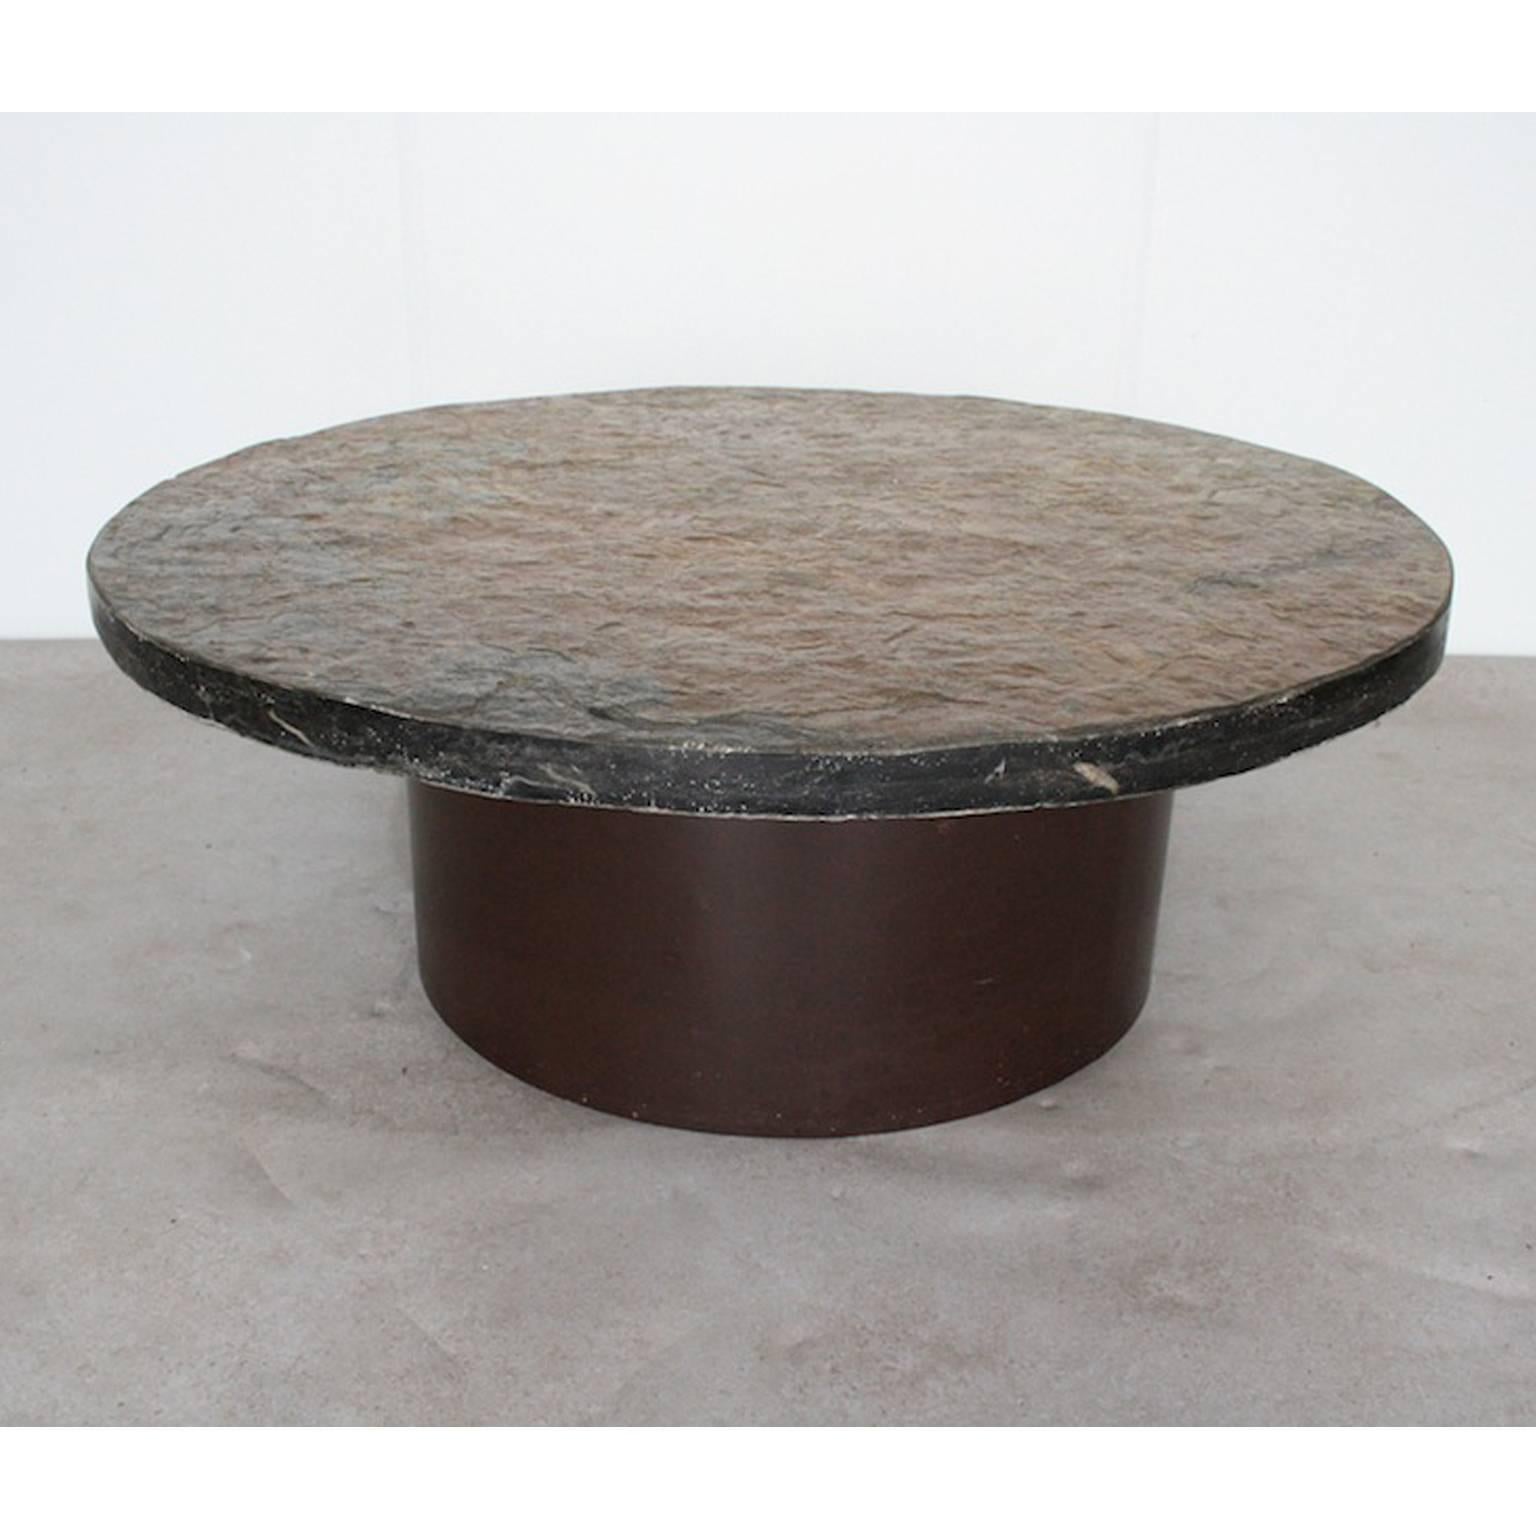 Heavy stone coffee table in the style of Paul Kingma

330 mm thick stone top and brown round metal foot.

Measures: Diameter 102 cm
Height 38 cm.